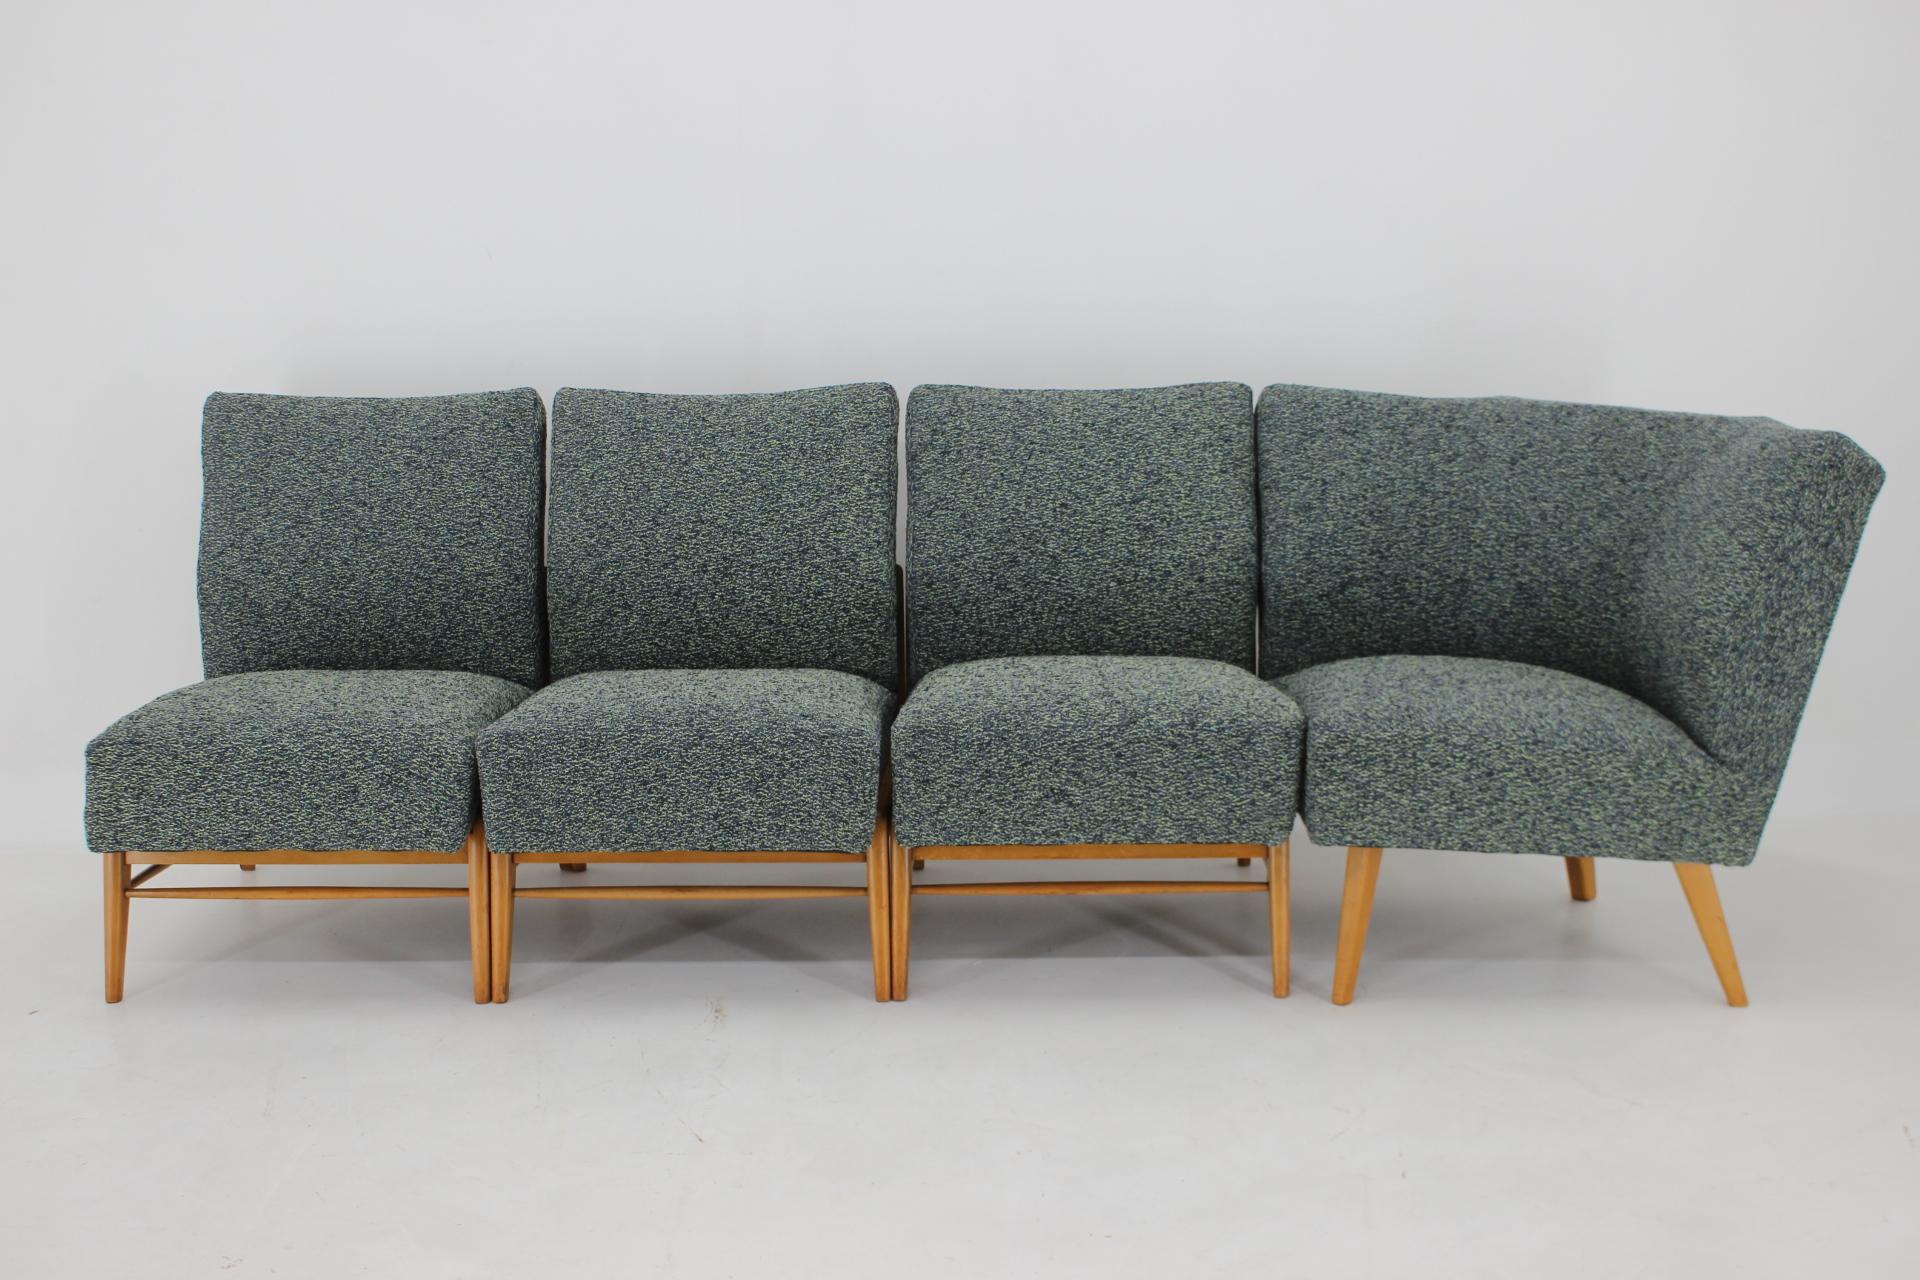 1970s Modular Sofa or Chairs in Beech wood and Kirgby Fabric, Czechoslovakia For Sale 1